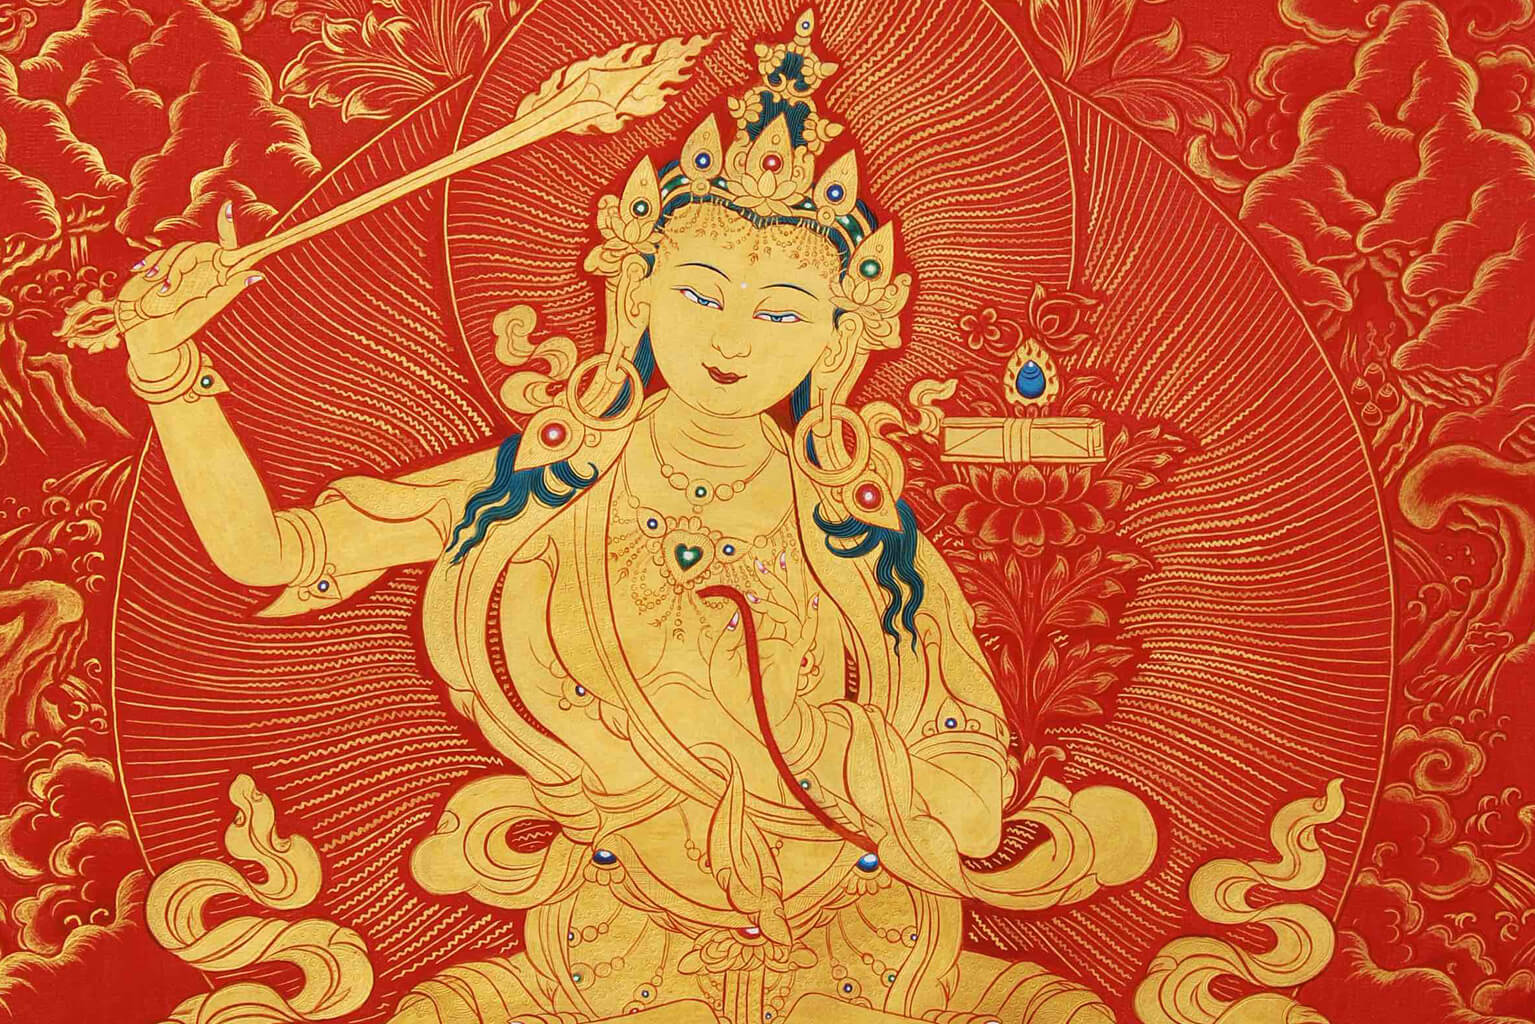 Manjushri is depicted as a male bodhisattva wielding a flaming sword in his right hand, representing the realization of transcendent wisdom which cuts down ignorance and duality. The text supported by the lotus held in his left hand is a Prajñaparamita Sutra, representing his attainment of ultimate realization from the blossoming of wisdom.